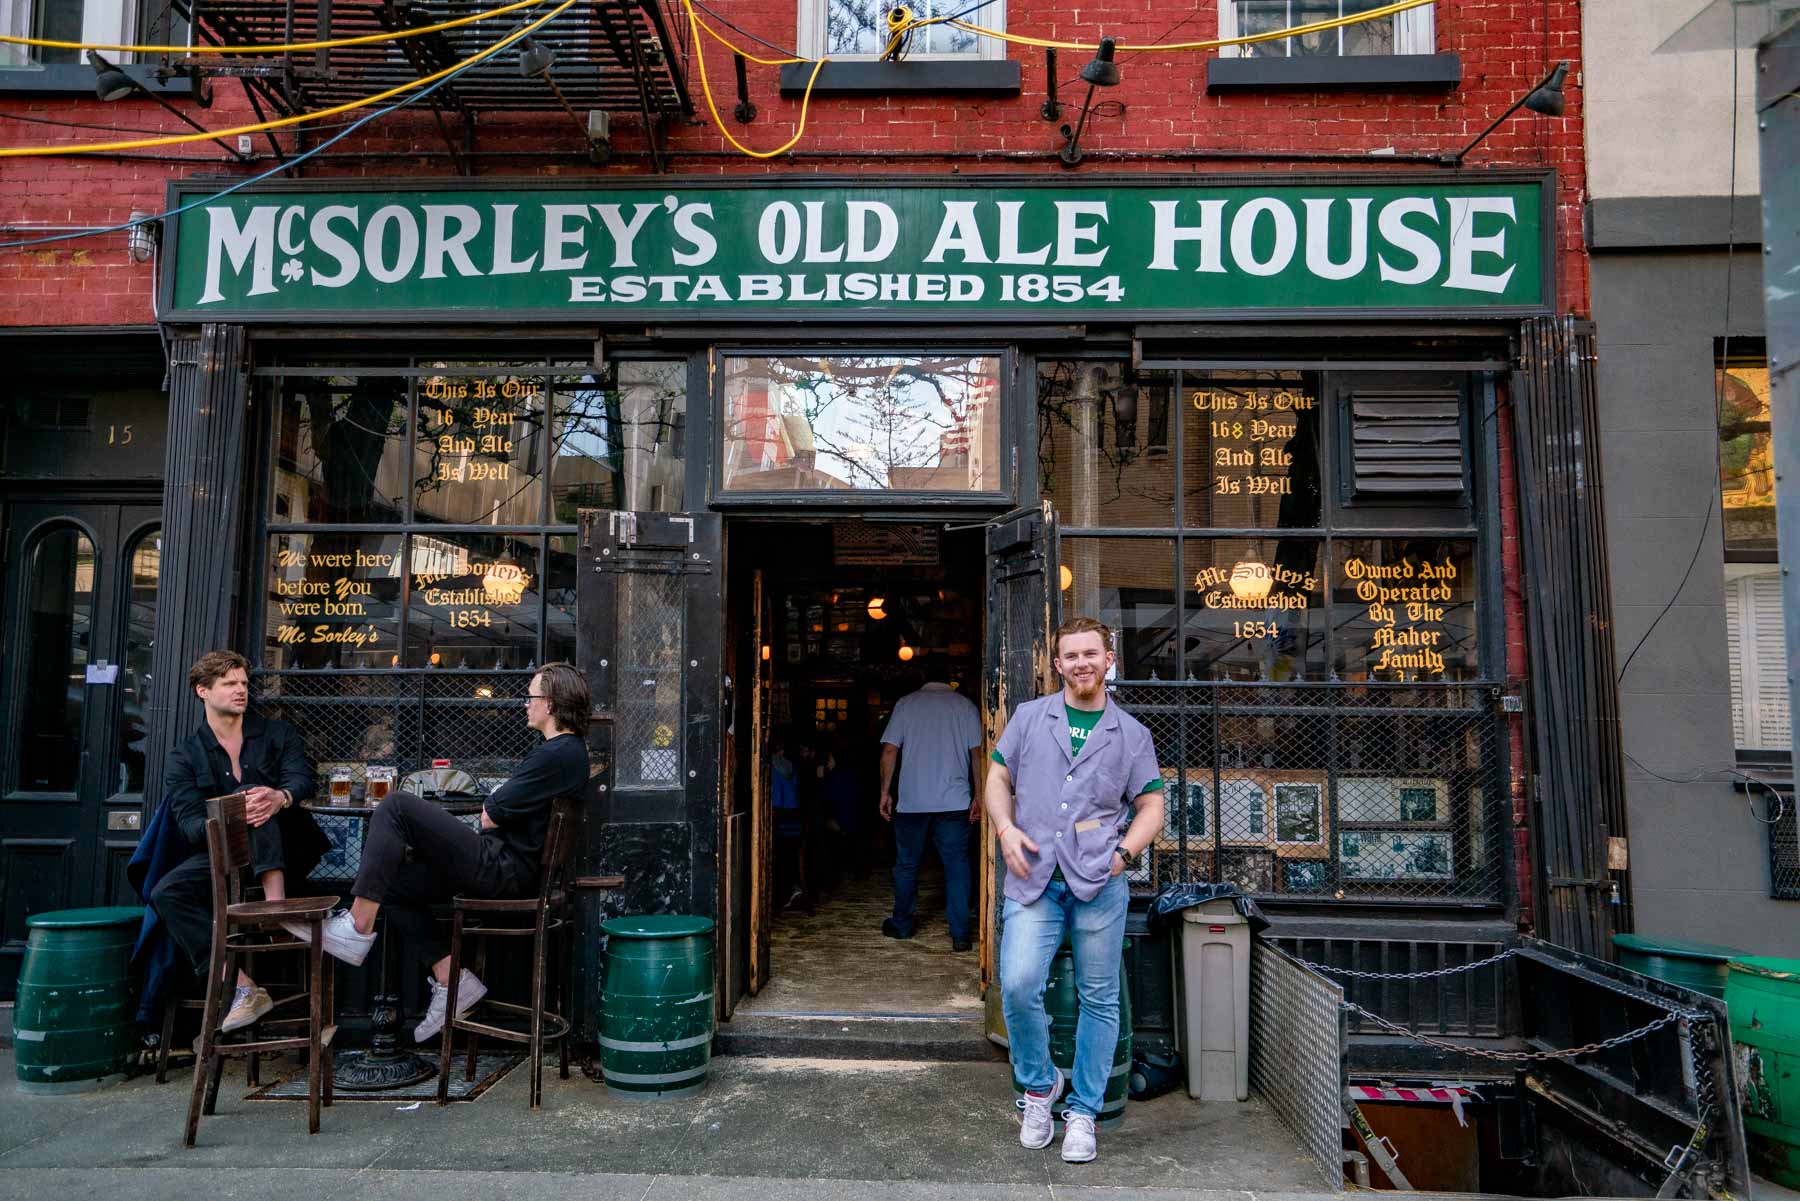 McSorley's Old Ale House, Best Things to do on St. Patrick's Day in NYC